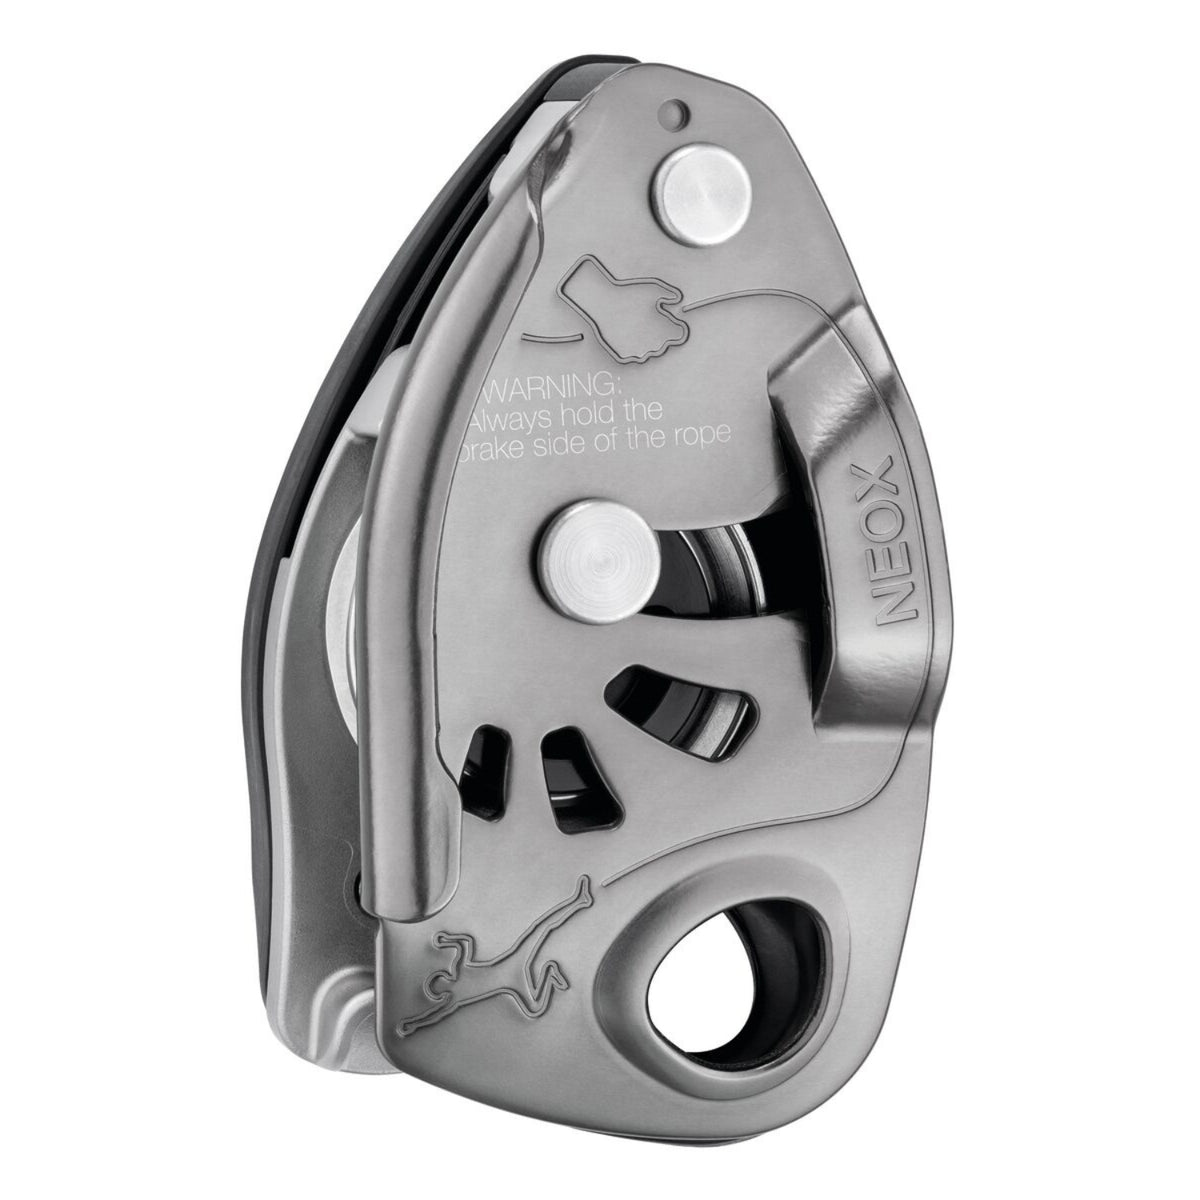 Petzl Neox grey assisted belay device